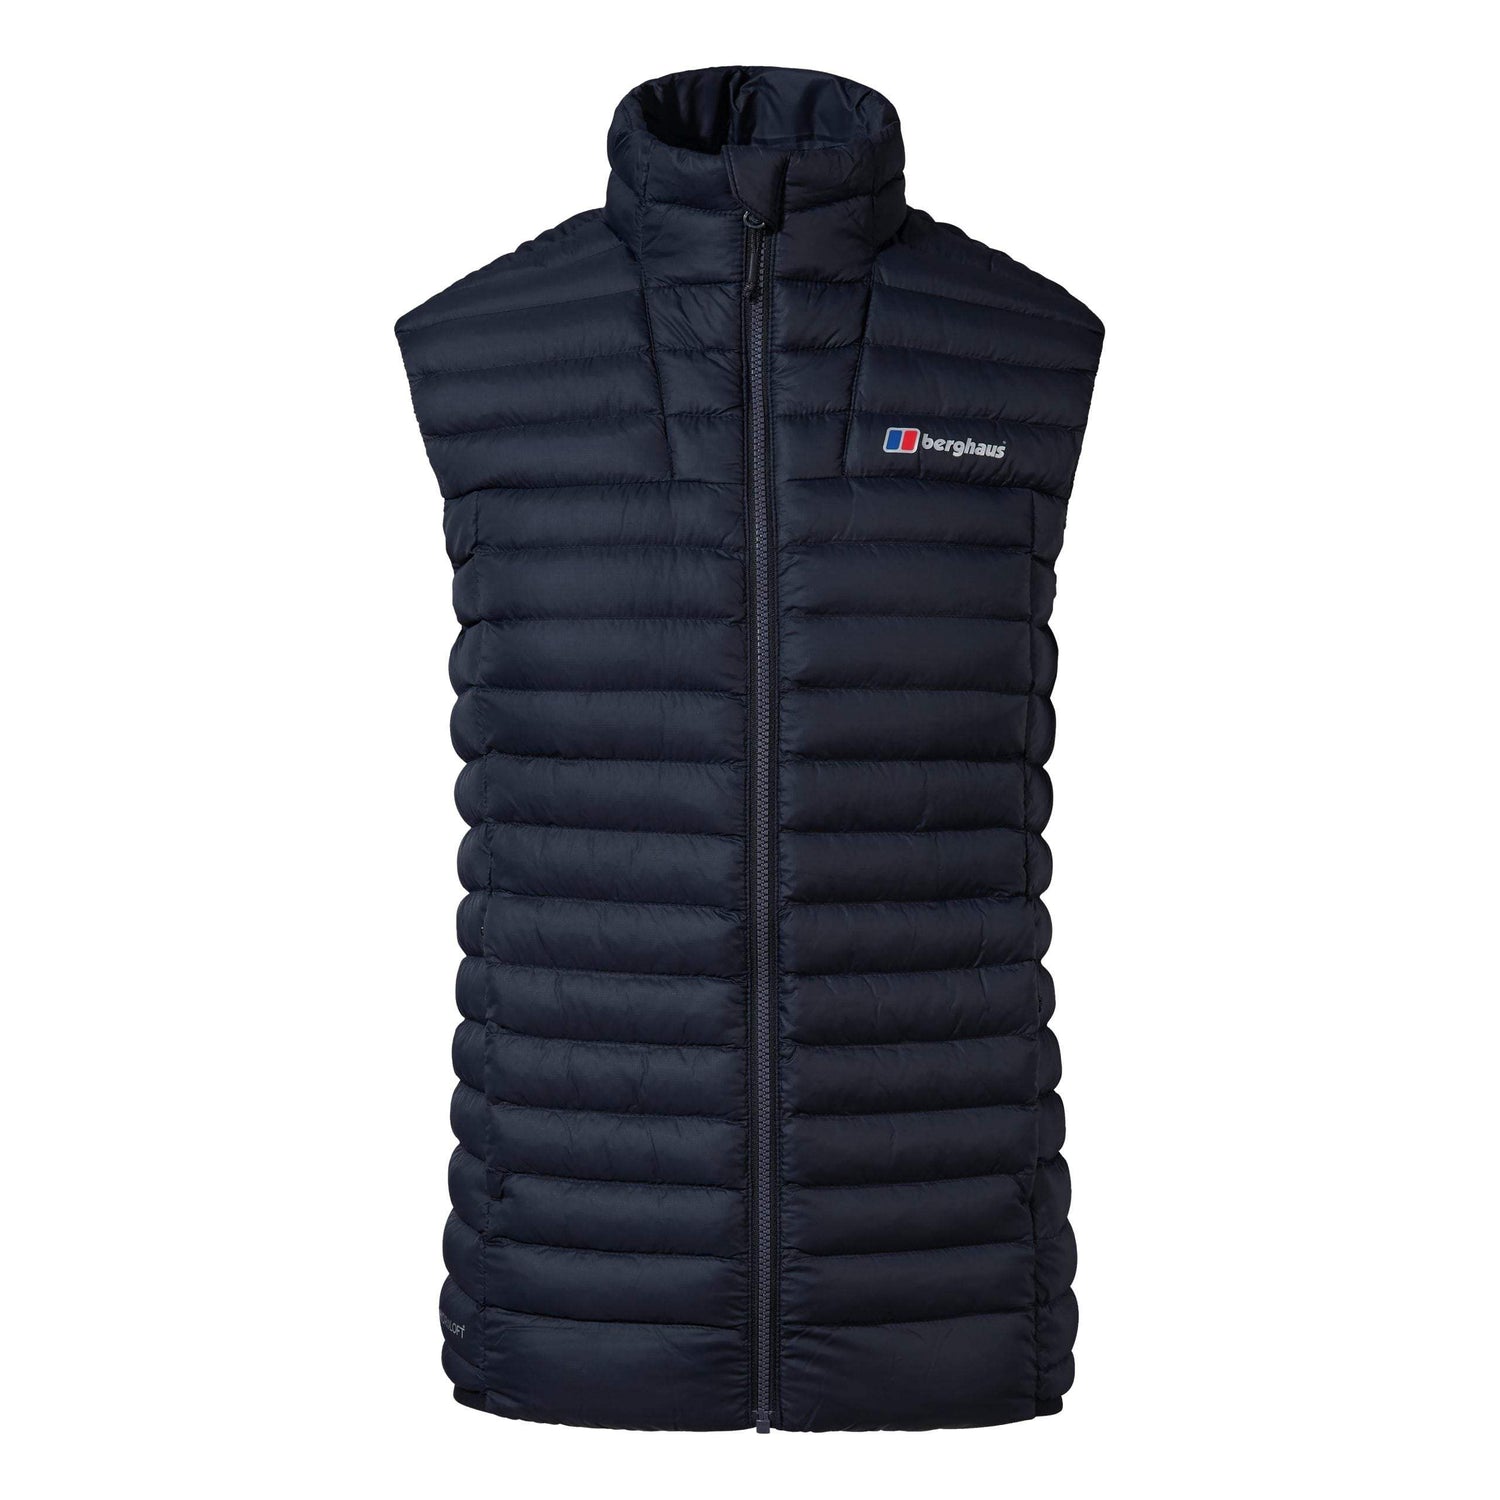 Promotional Gilets & Fleeces Gifts